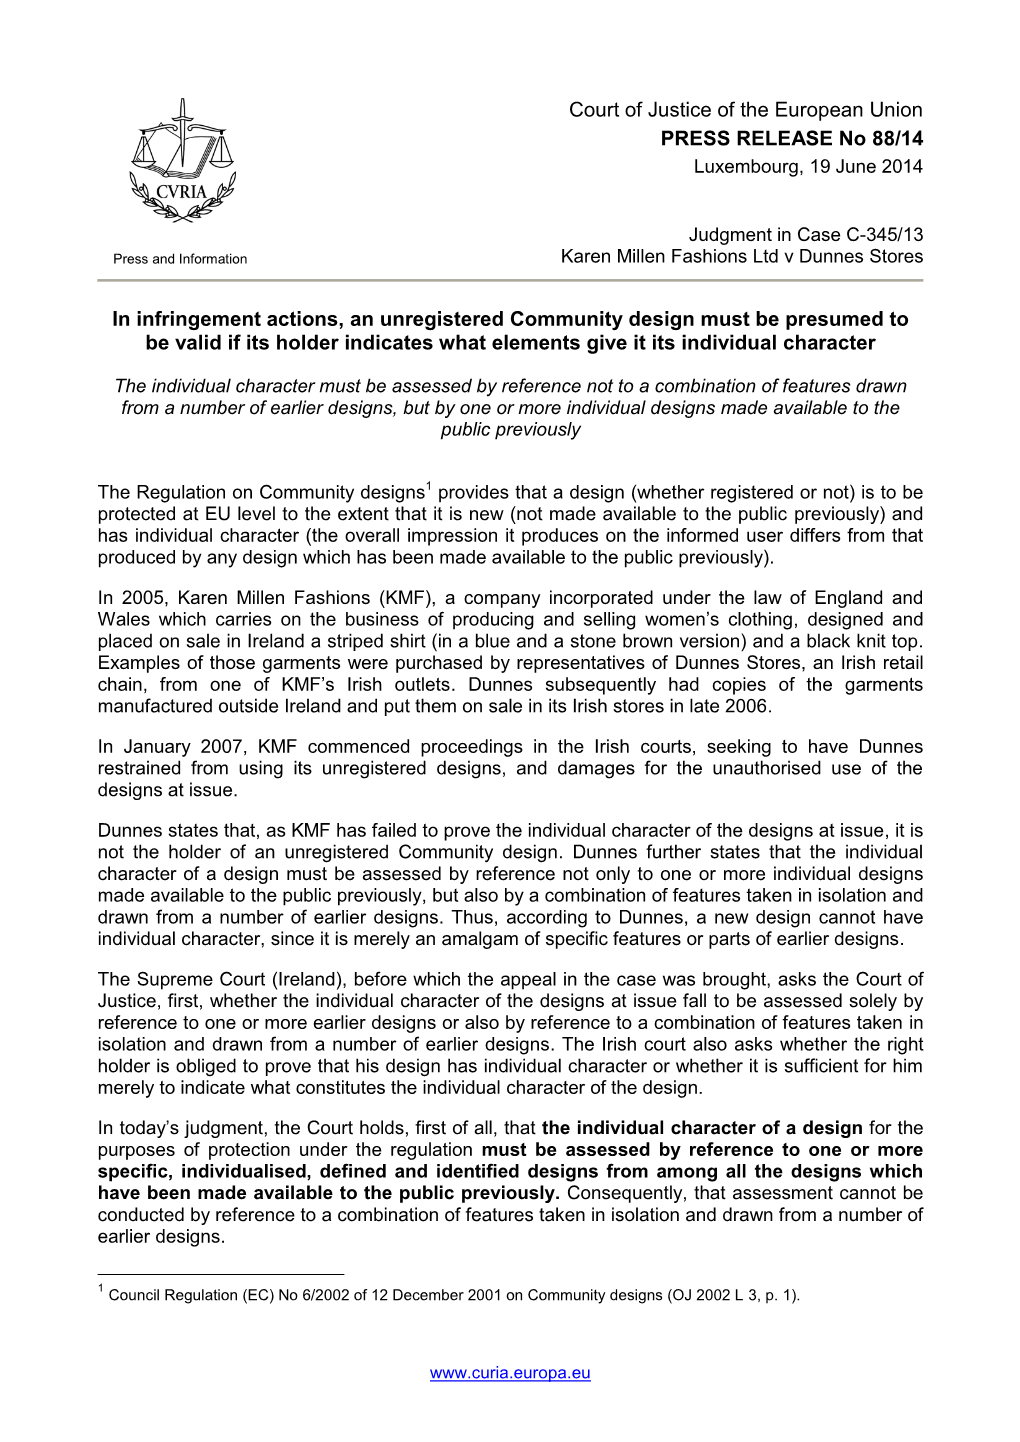 Court of Justice of the European Union PRESS RELEASE No 88/14 Luxembourg, 19 June 2014